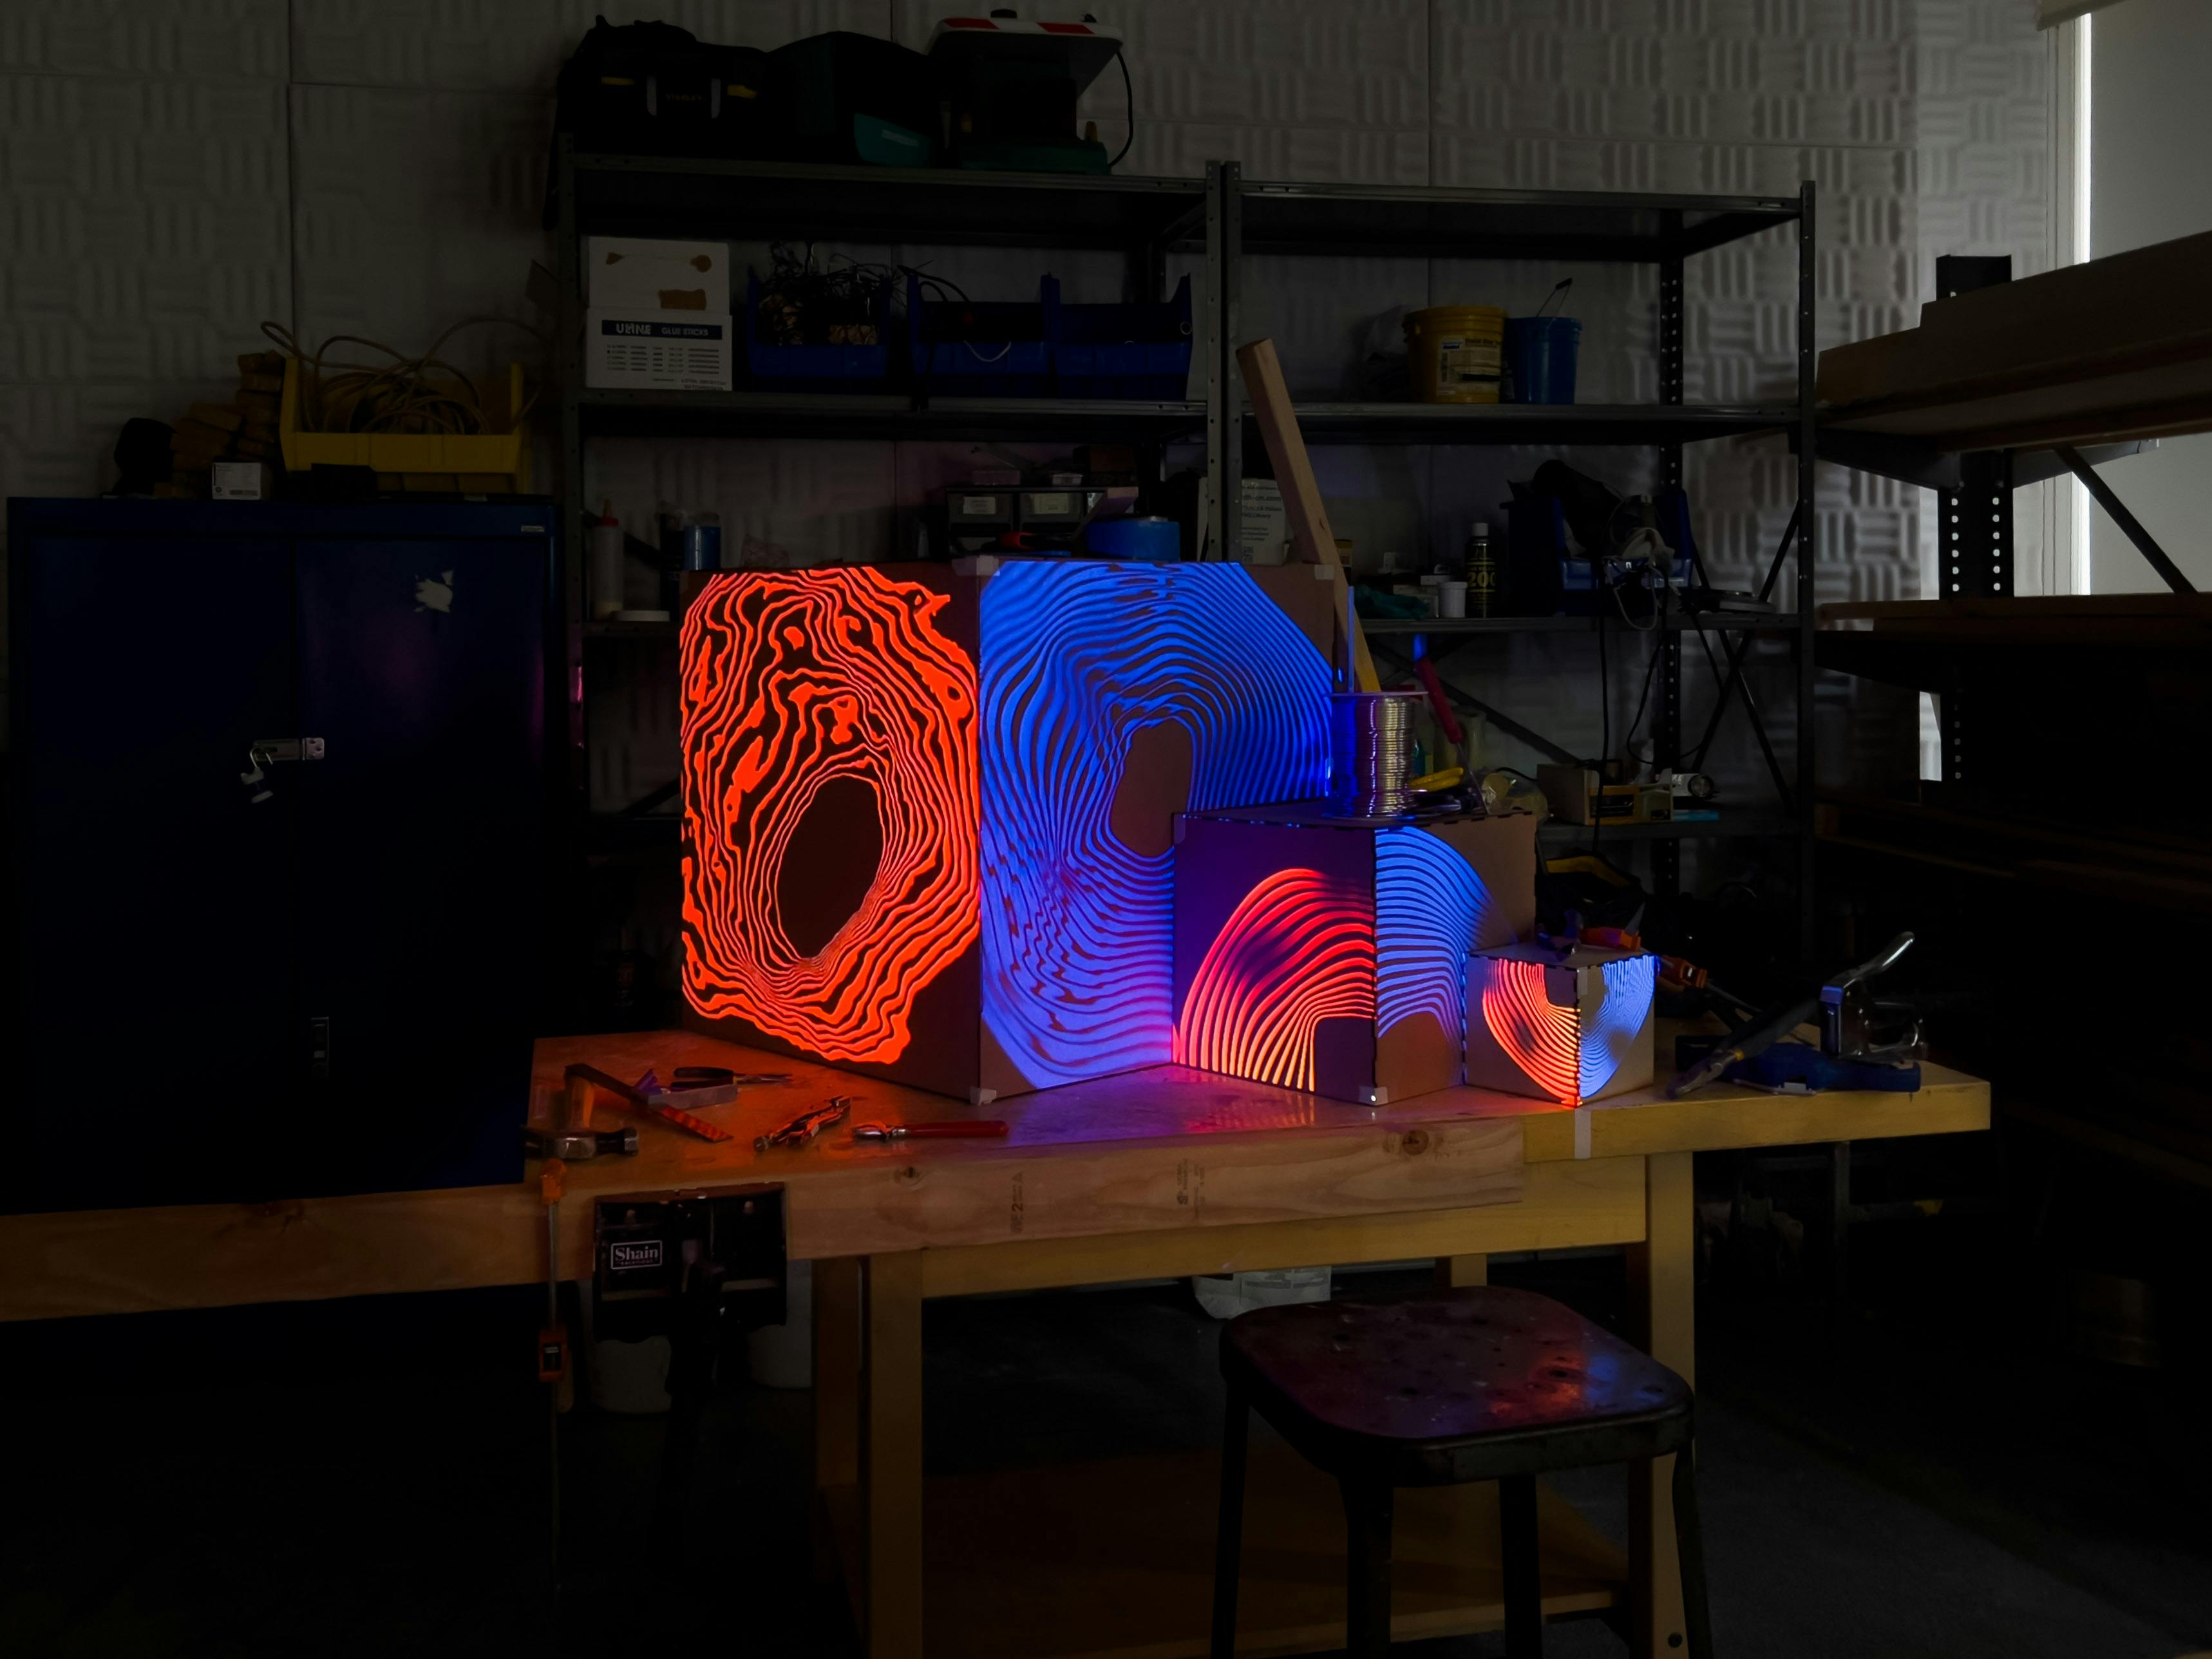 Projection mapping of a blue and orange pattern on the three cardboard cubes.